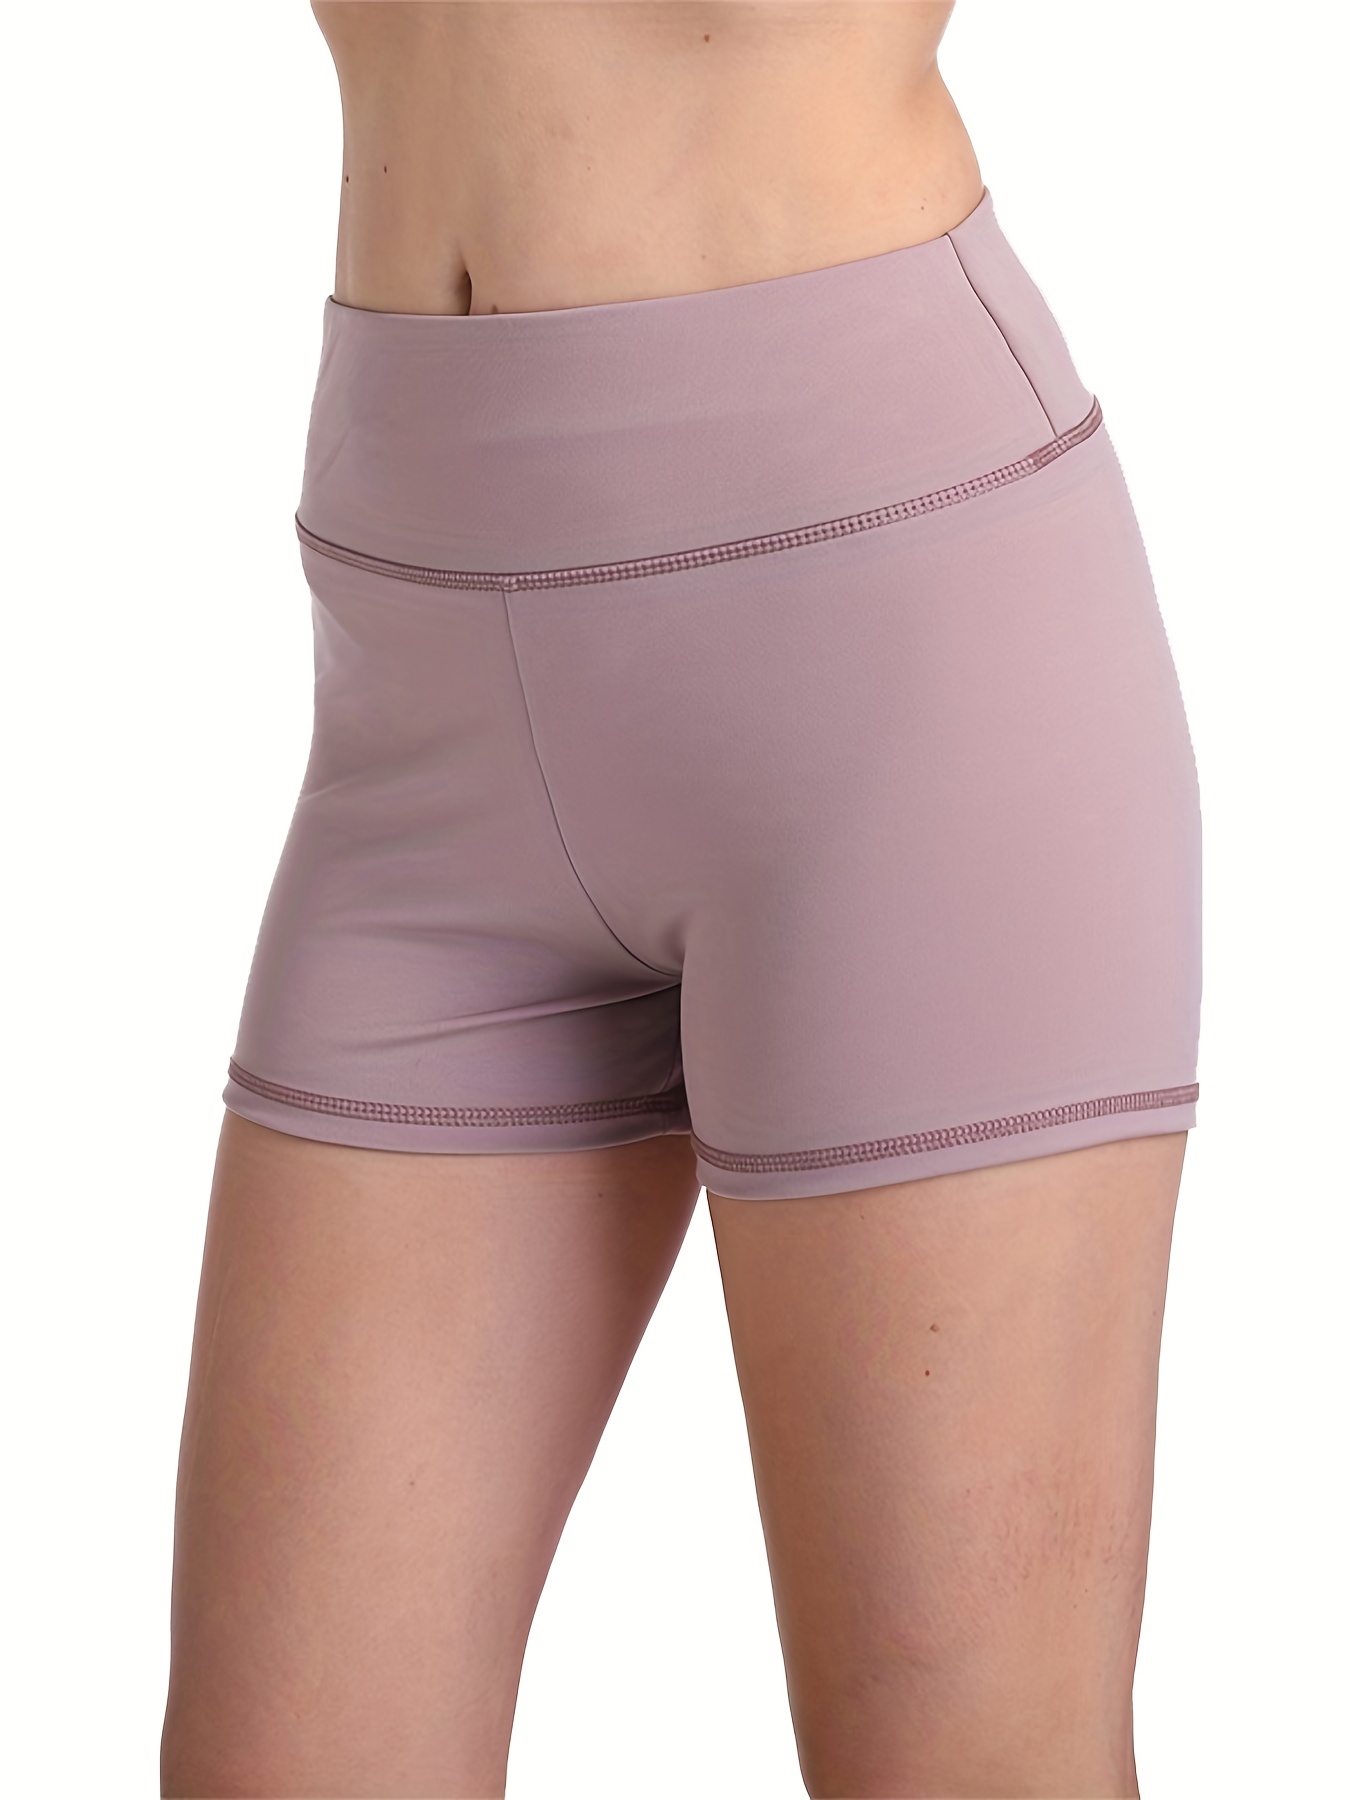 Summer Yoga Shorts For Women Casual Sports Gym Workout Short